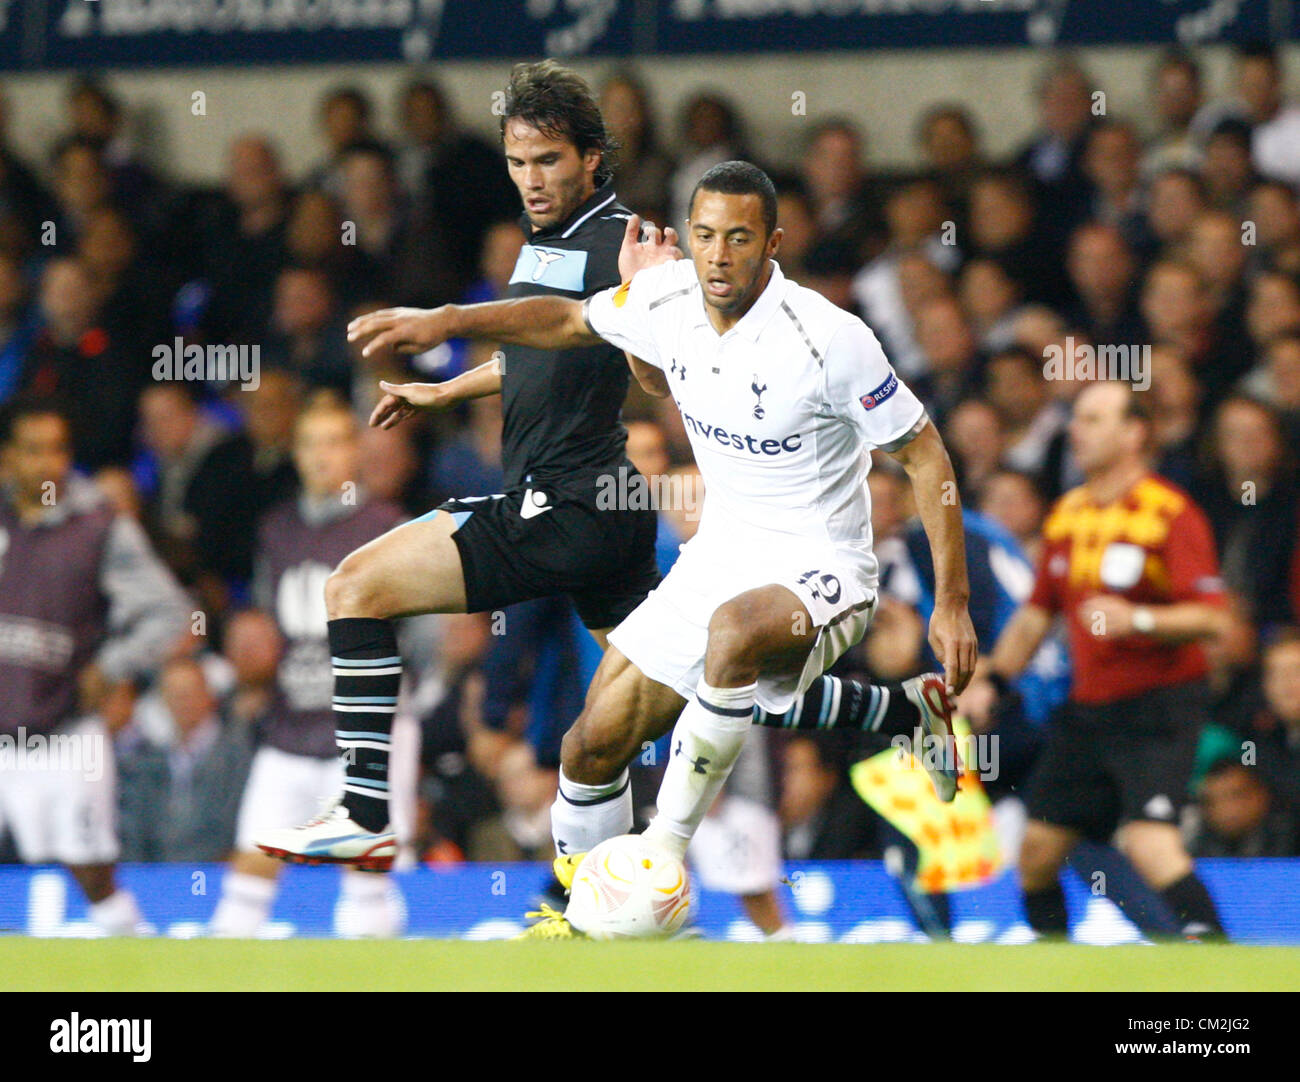 20.09.2012 London, ENGLAND:  Mouusa Dembele of Tottenham Hotspur  and Alvaro Gonzalez of S.S. Lazio in action during the Europa League Group J match between Tottenham Hotspur and SS Lazio at White Hart Lane Stadium Stock Photo